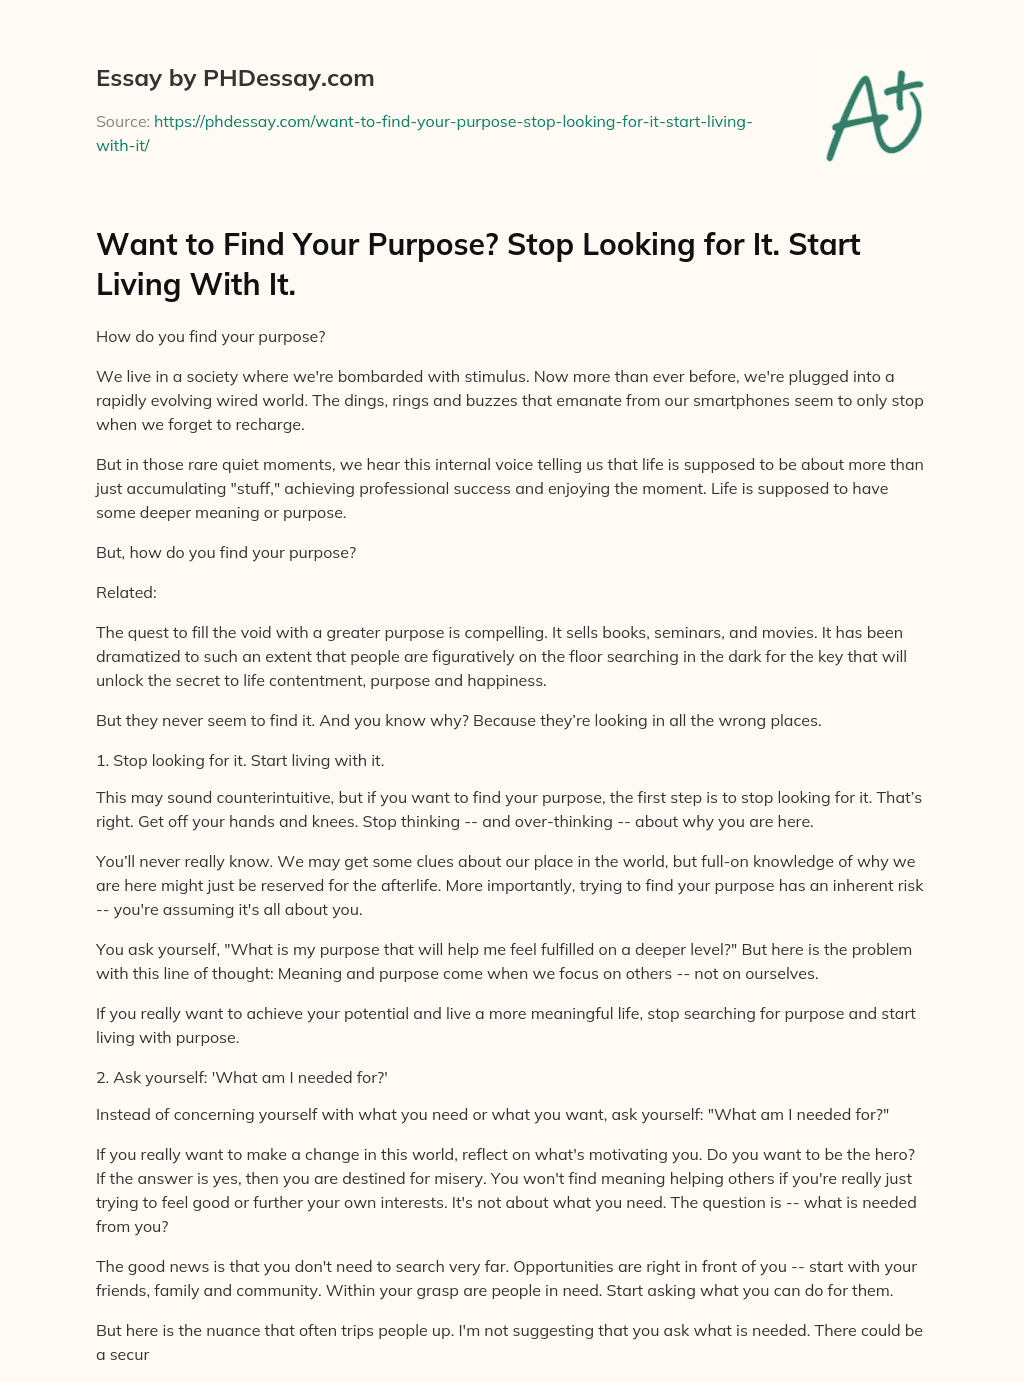 Want to Find Your Purpose? Stop Looking for It. Start Living With It. essay